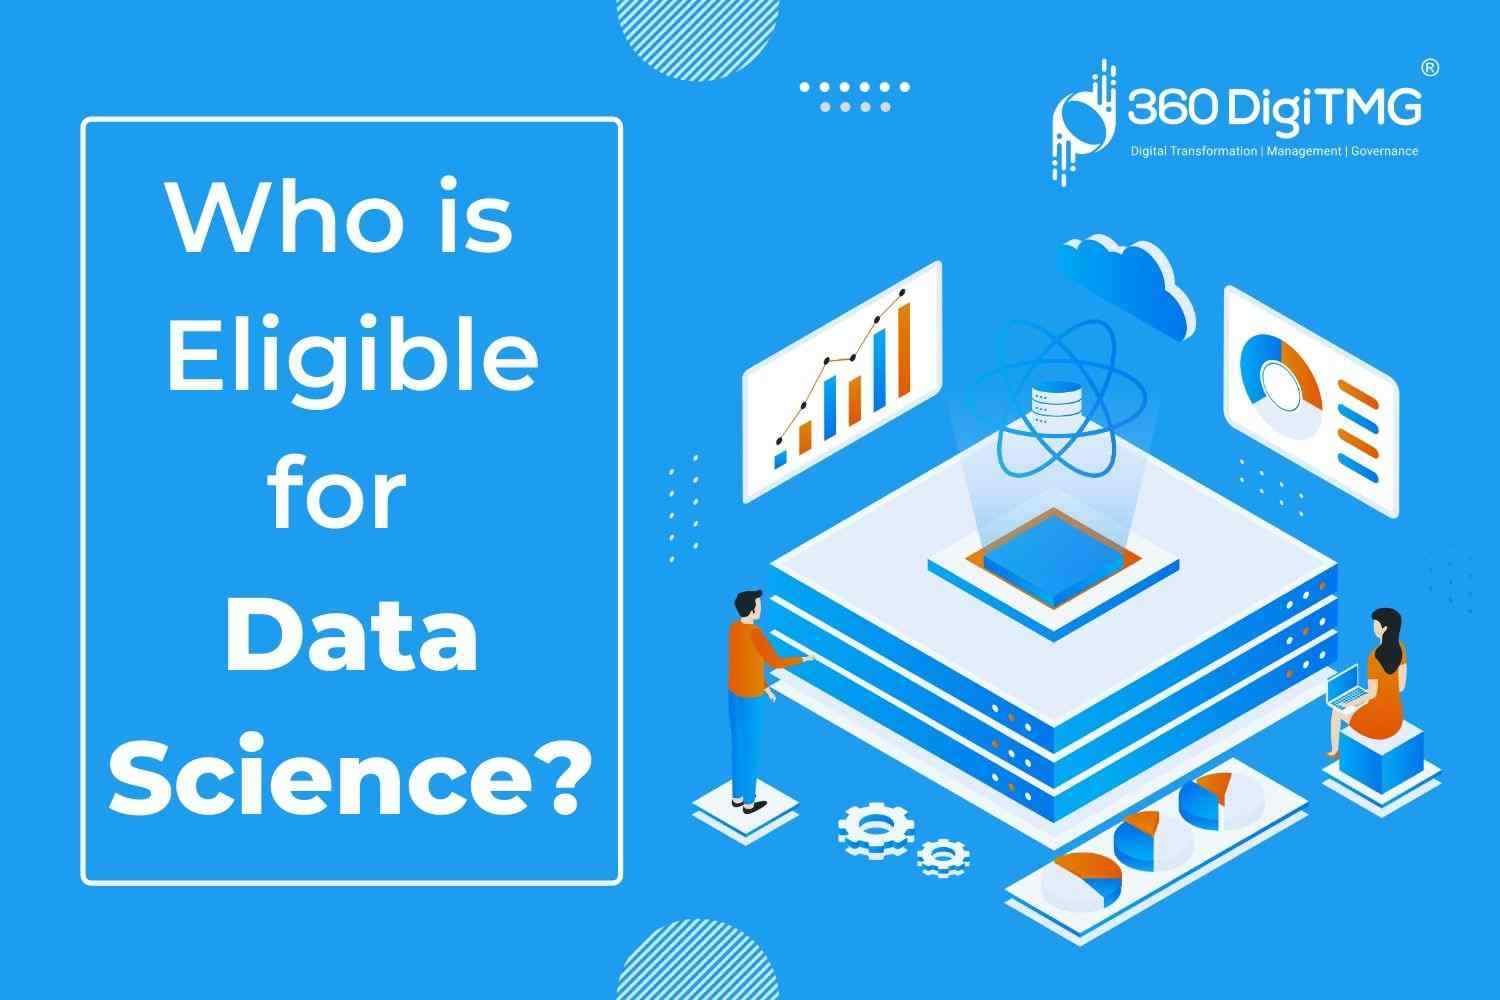 Who is Eligible for Data Science?